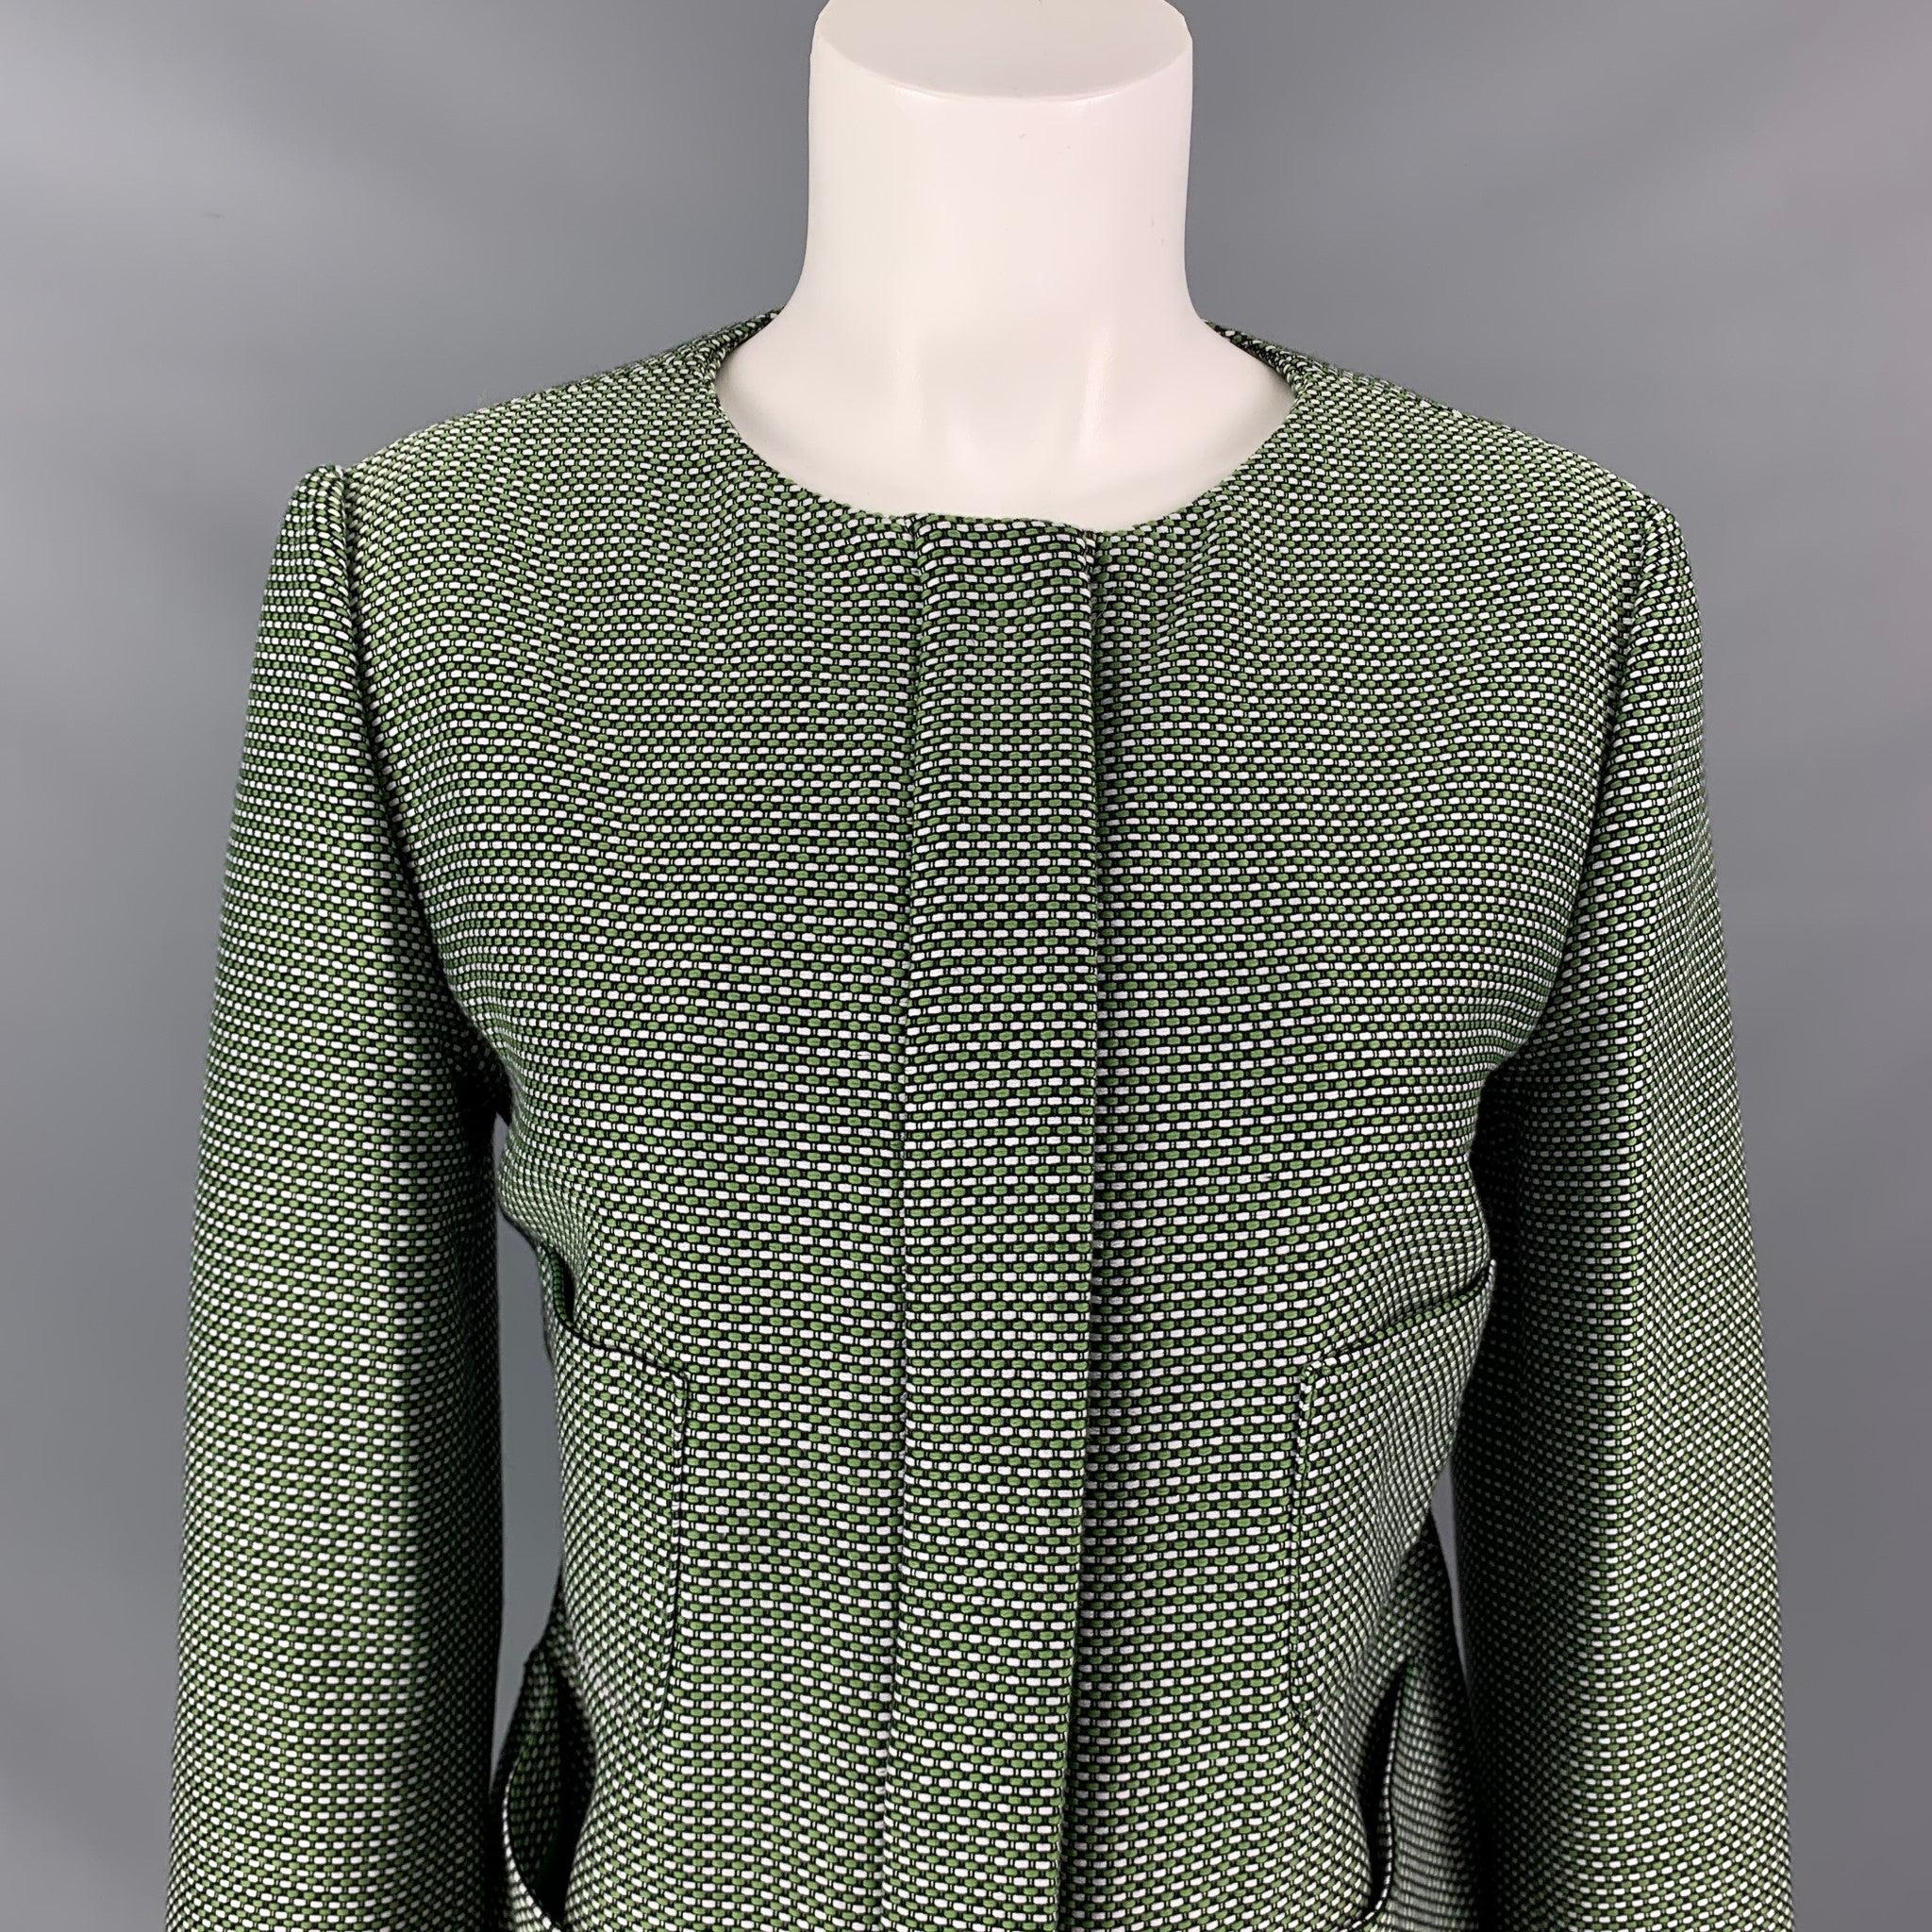 ARMANI COLLEZIONI jacket comes in a green & white woven cotton / polyester featuring a collarless style, patch pockets, and a hidden zip up closure. New With Tags.  

Marked:   12 

Measurements: 
 
Shoulder: 16 inches  Bust: 42 inches Sleeve: 22